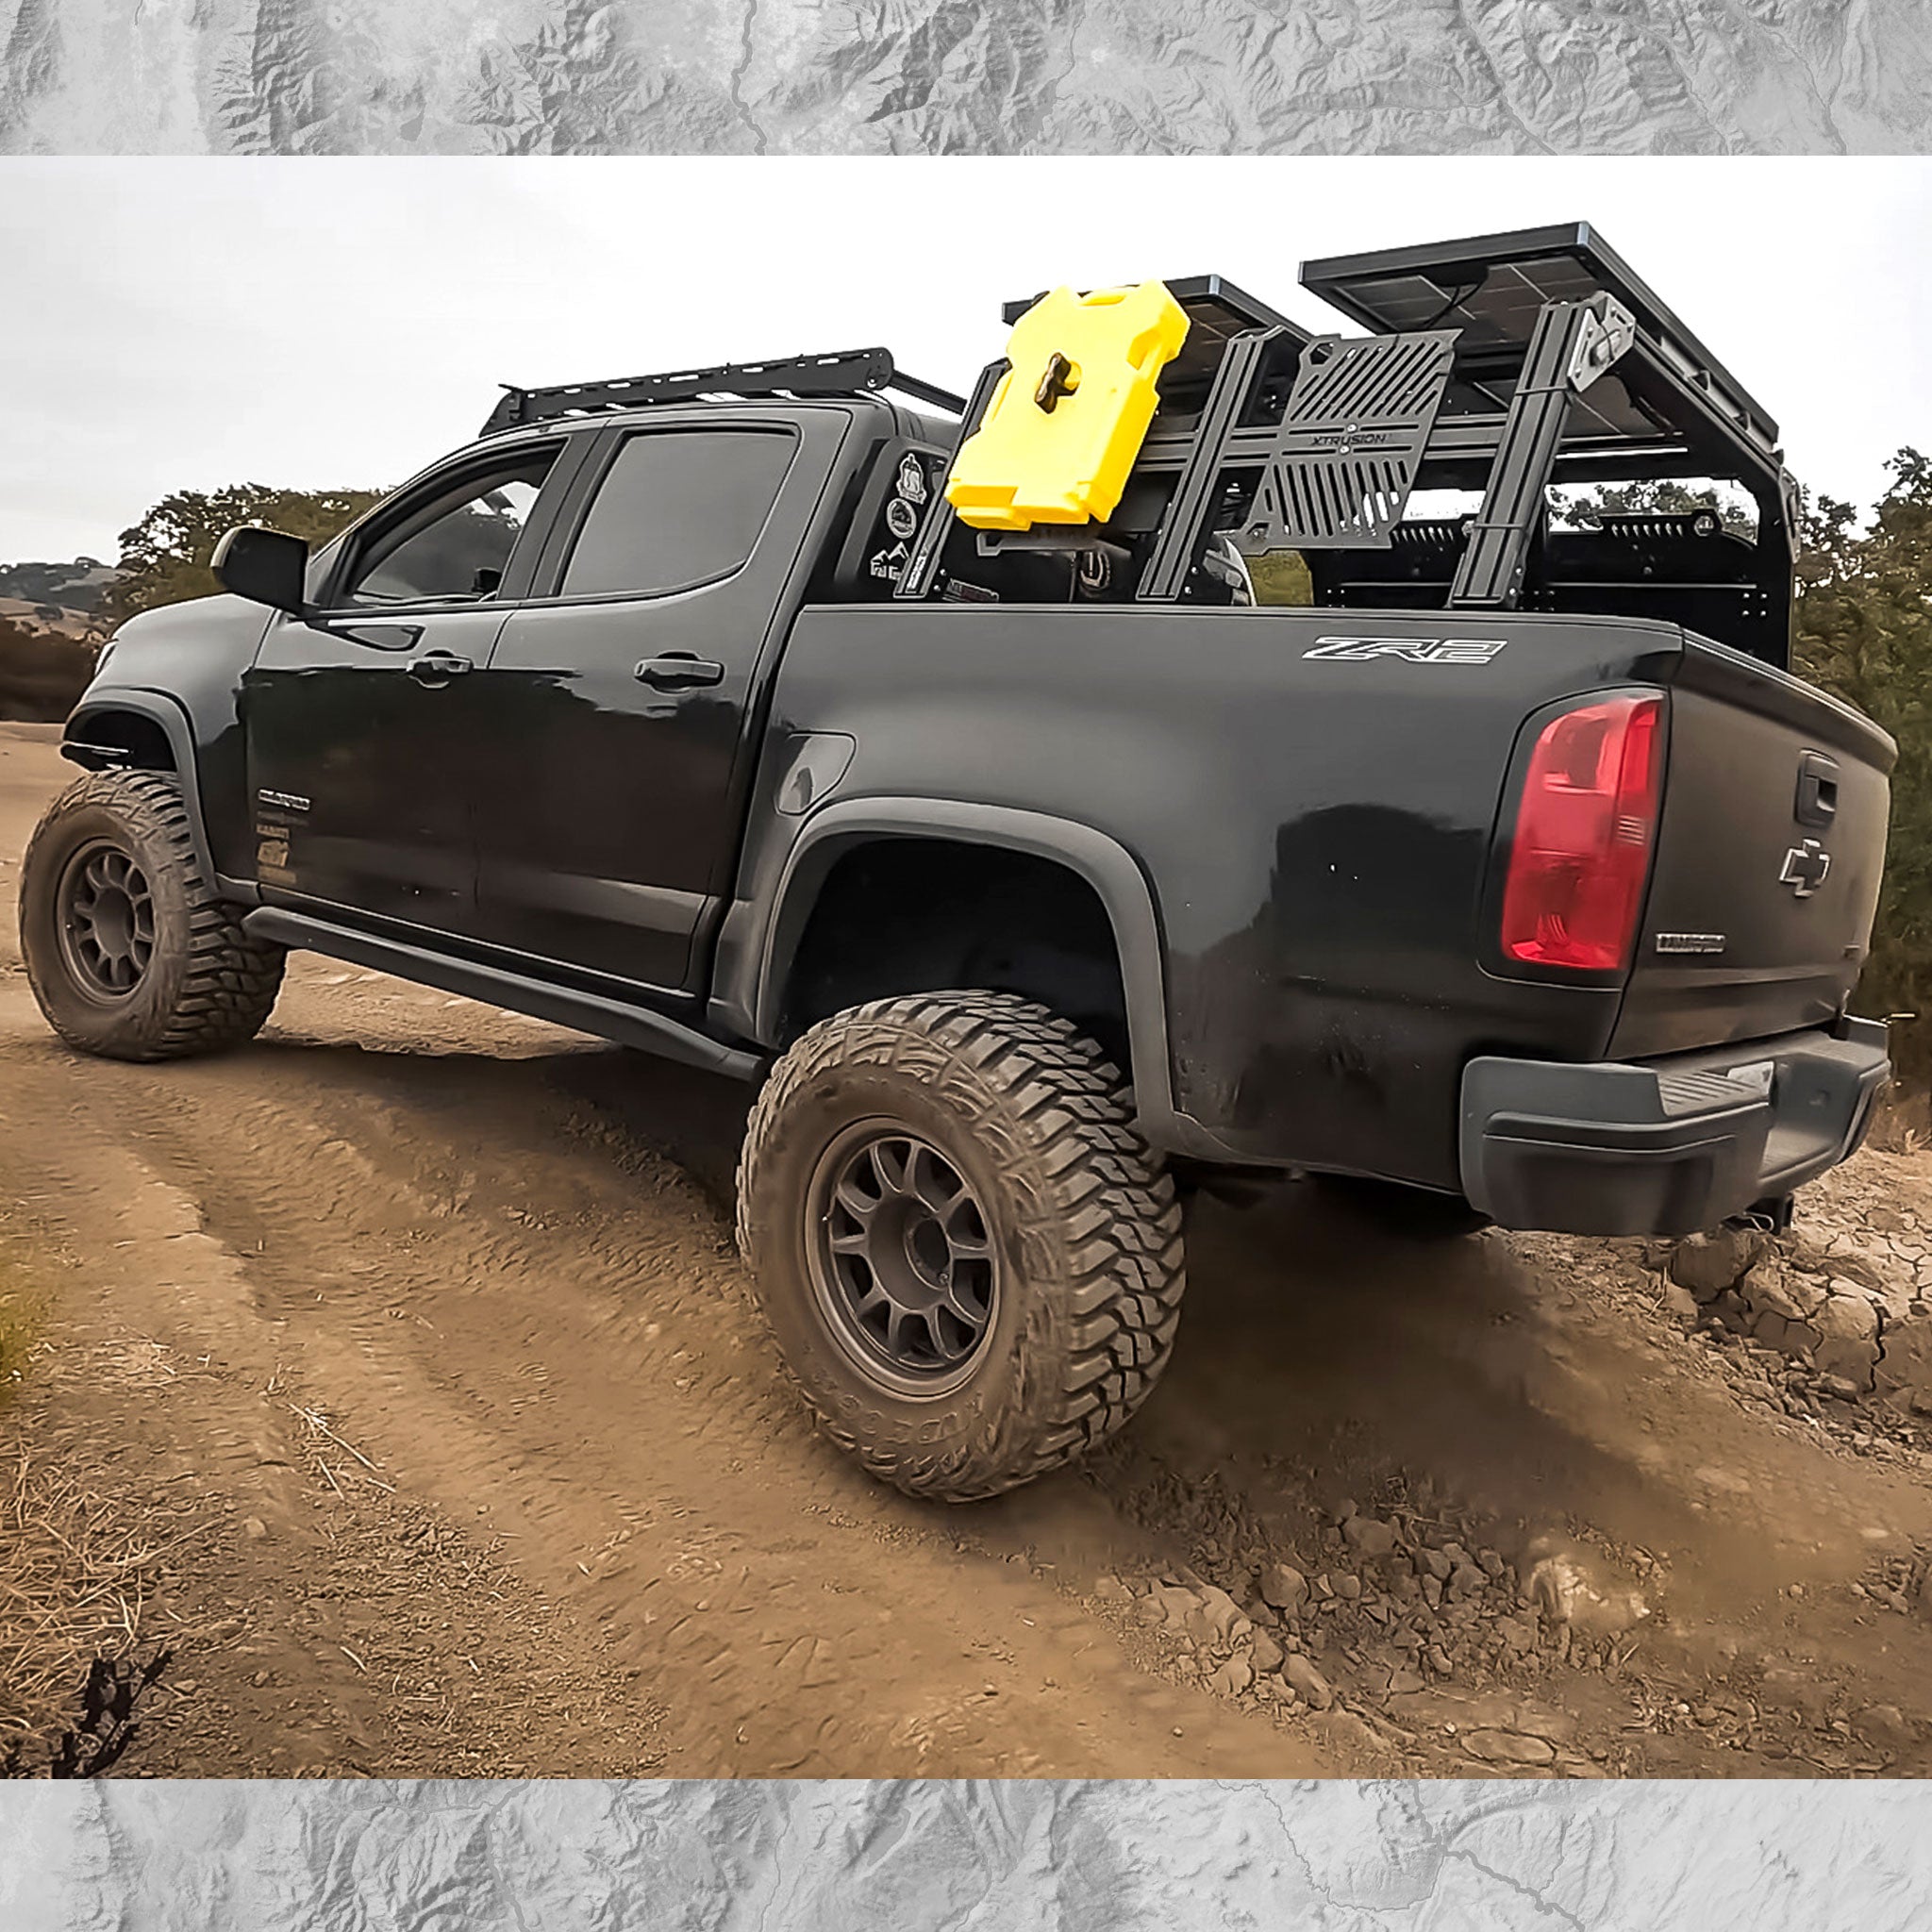 Chevy Colorado with XTR3 Overland Bed Rack, Molles, Rotopax, and Solar panels.